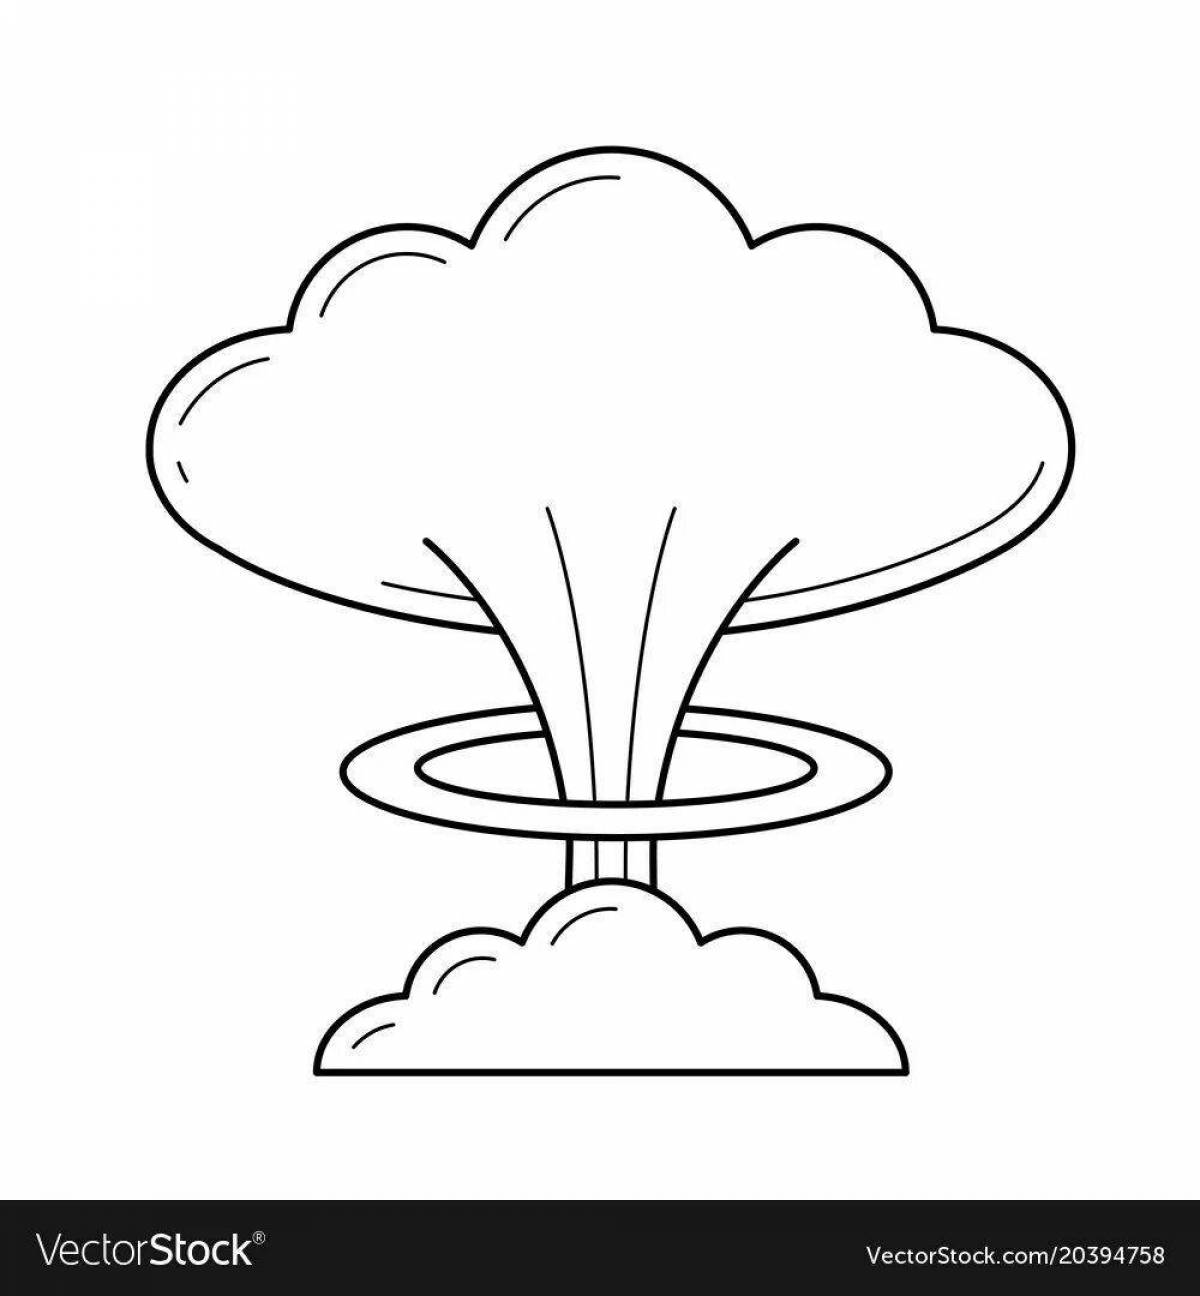 Nuclear explosion exciting coloring book